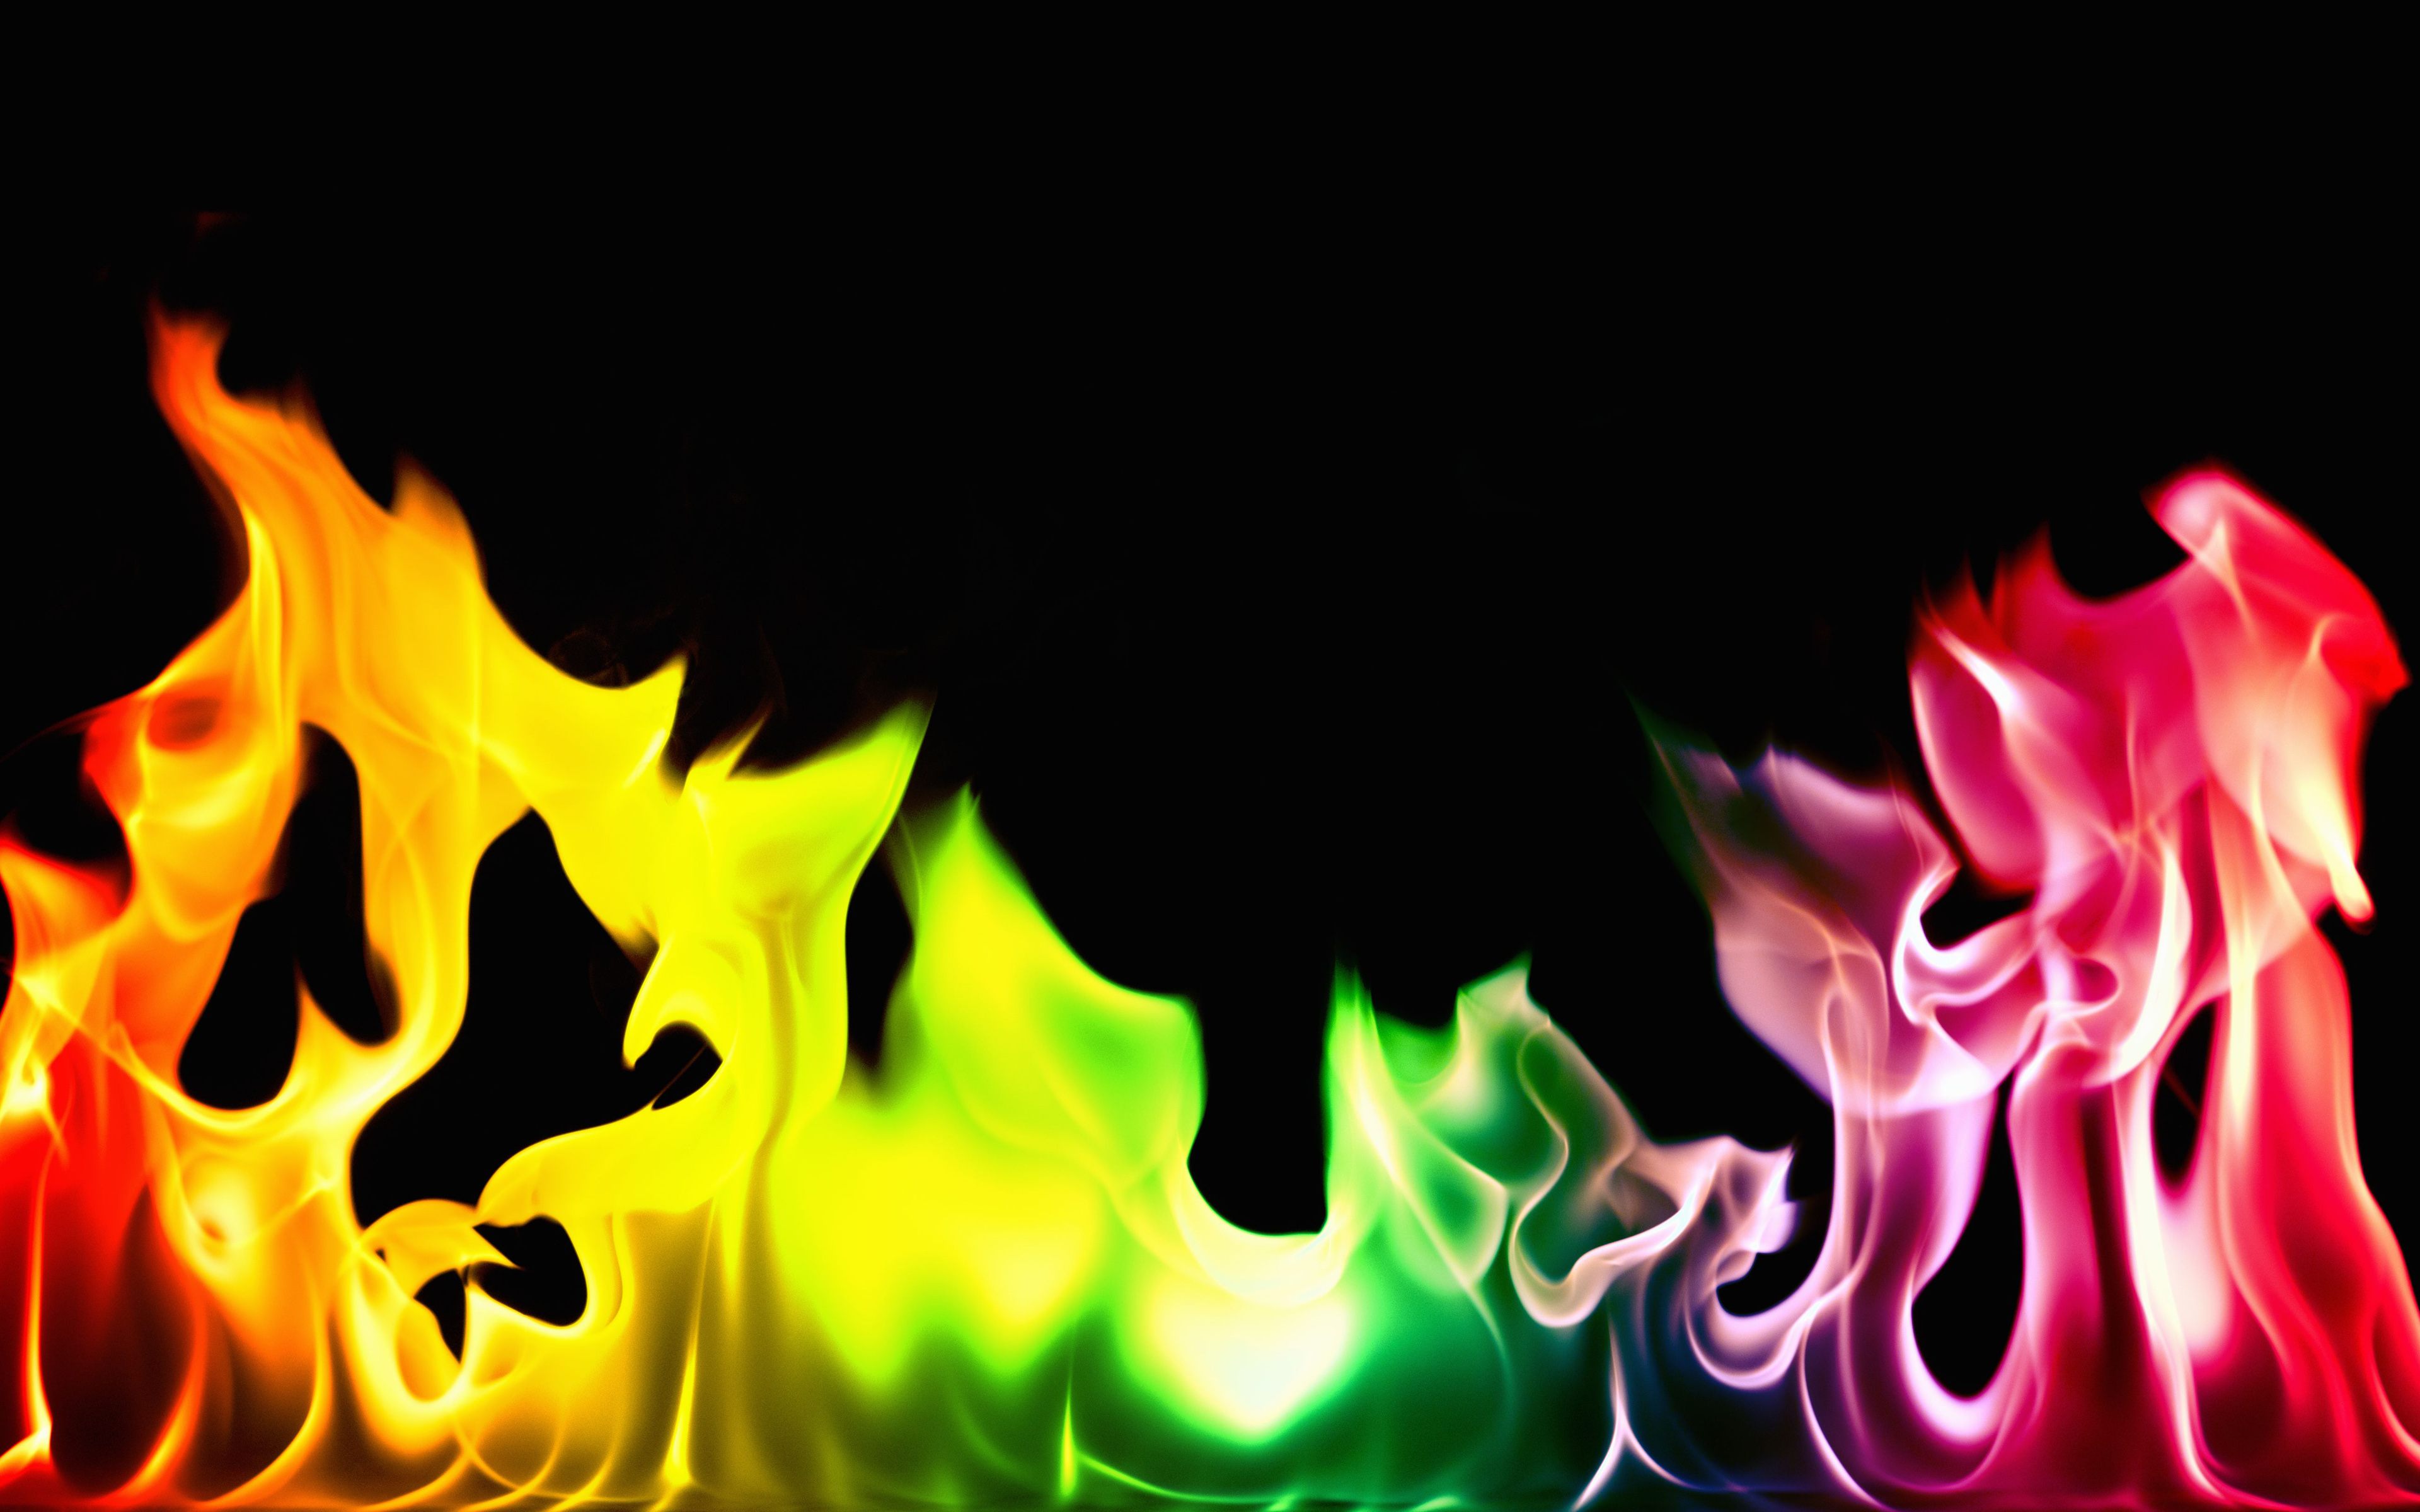 Download wallpaper colorful fire, 4k, rainbow, flames, black background, fire for desktop with resolution 3840x2400. High Quality HD picture wallpaper